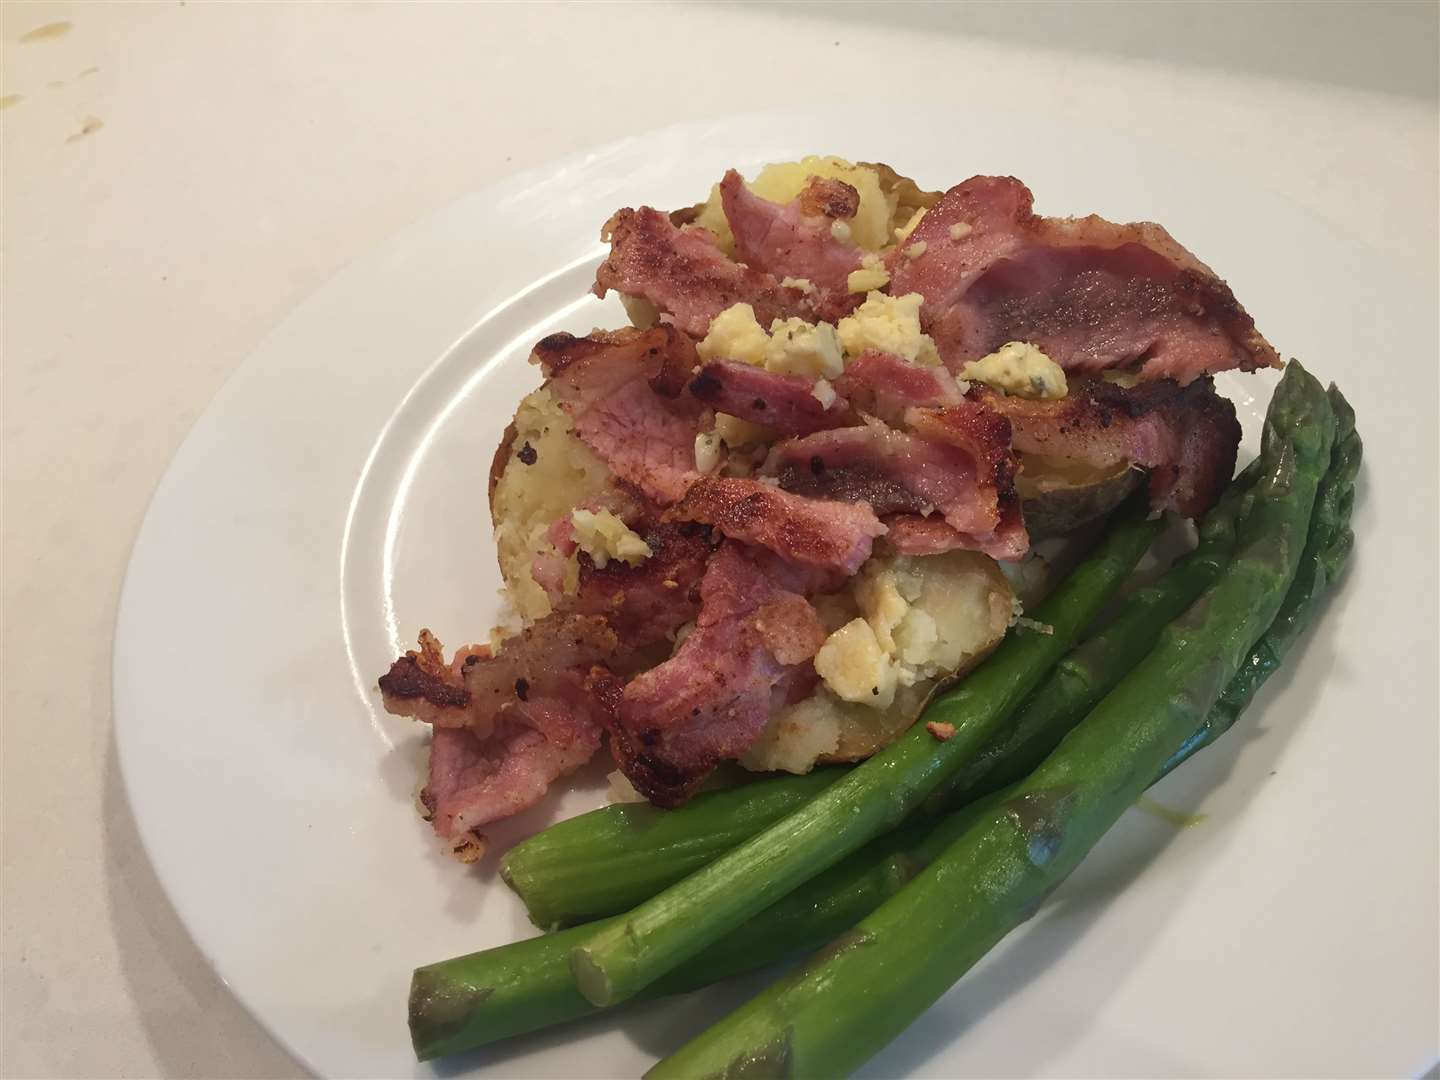 My dinner: Potato from Sittingbourne, bacon from Stour Valley Game, blue cheese from Kingcott Dairy and asparagus from Sutton Valence